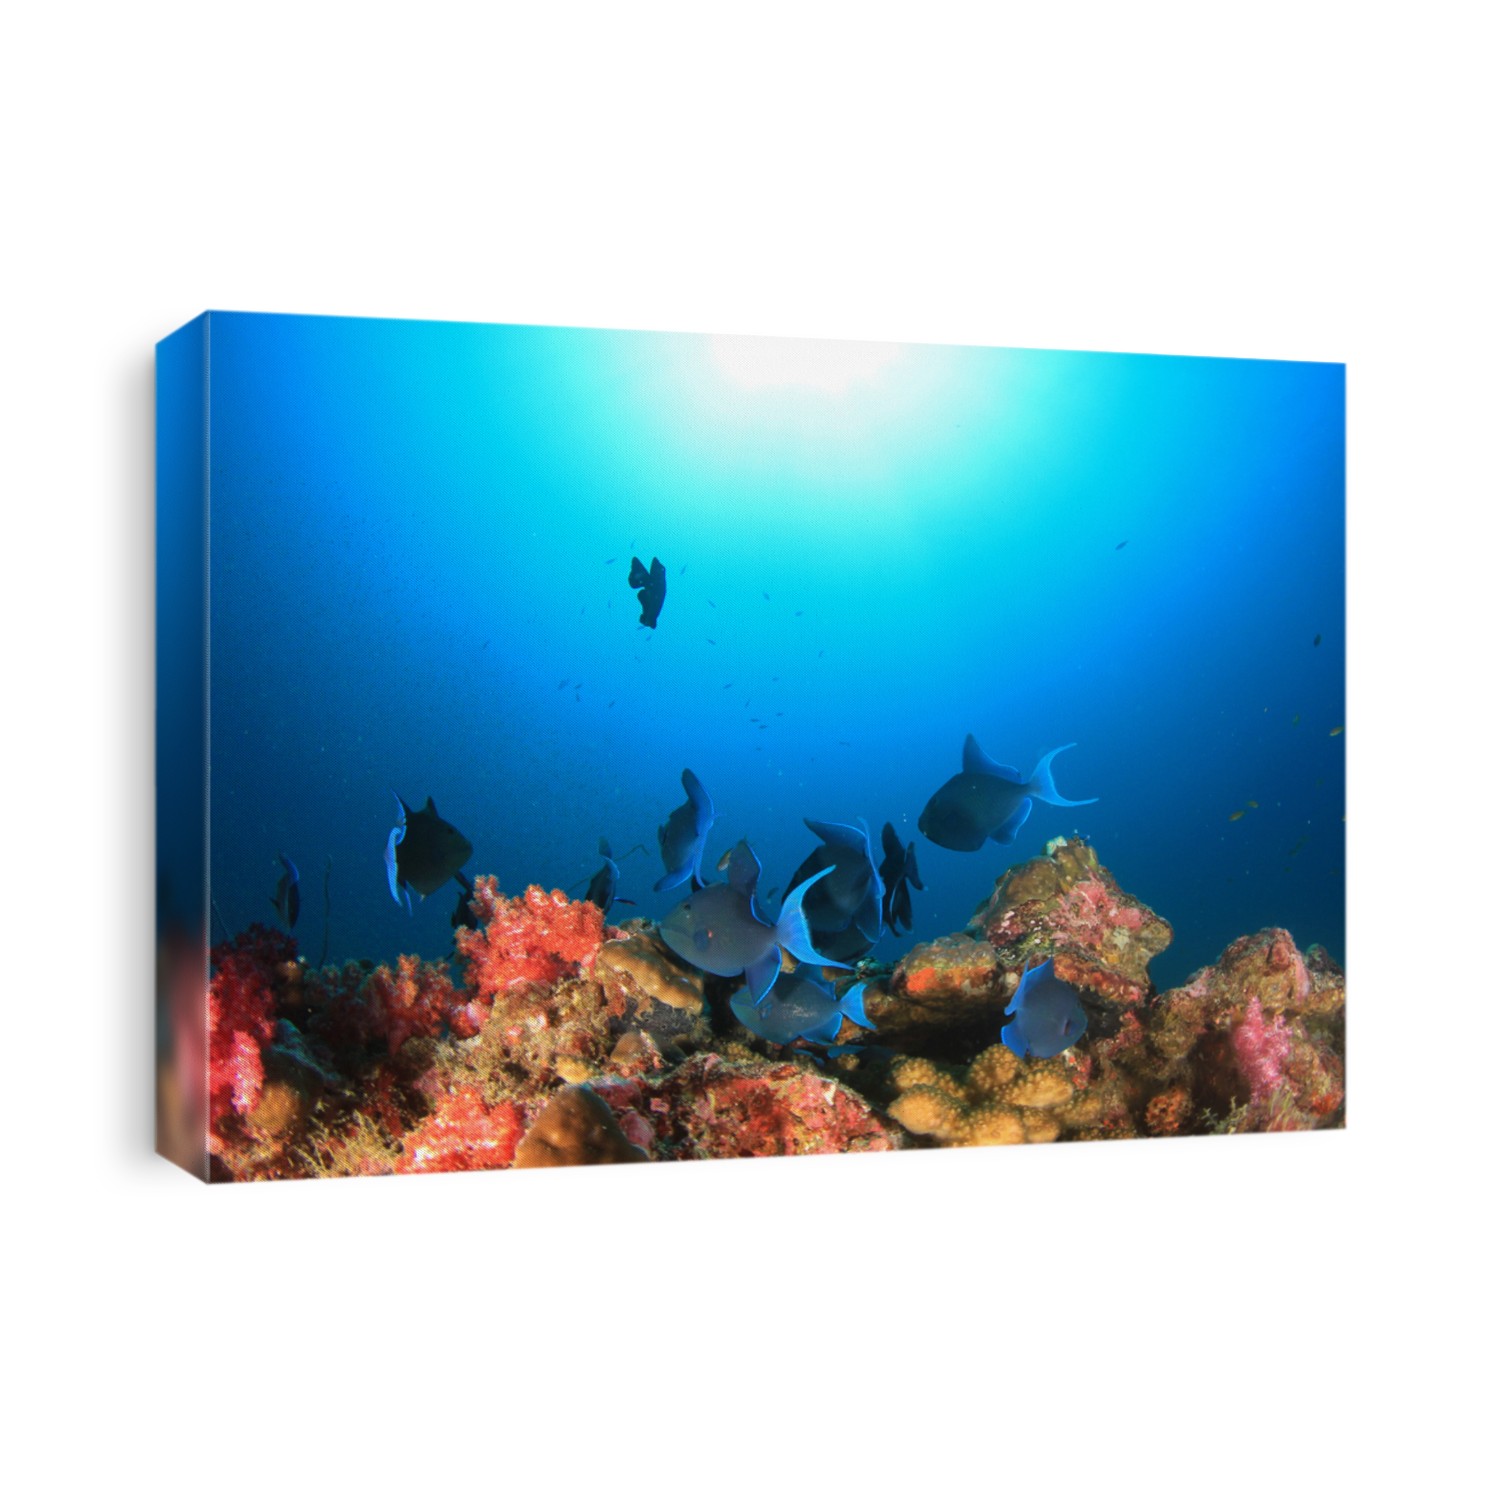 Redtooth Triggerfish and coral reef underwater